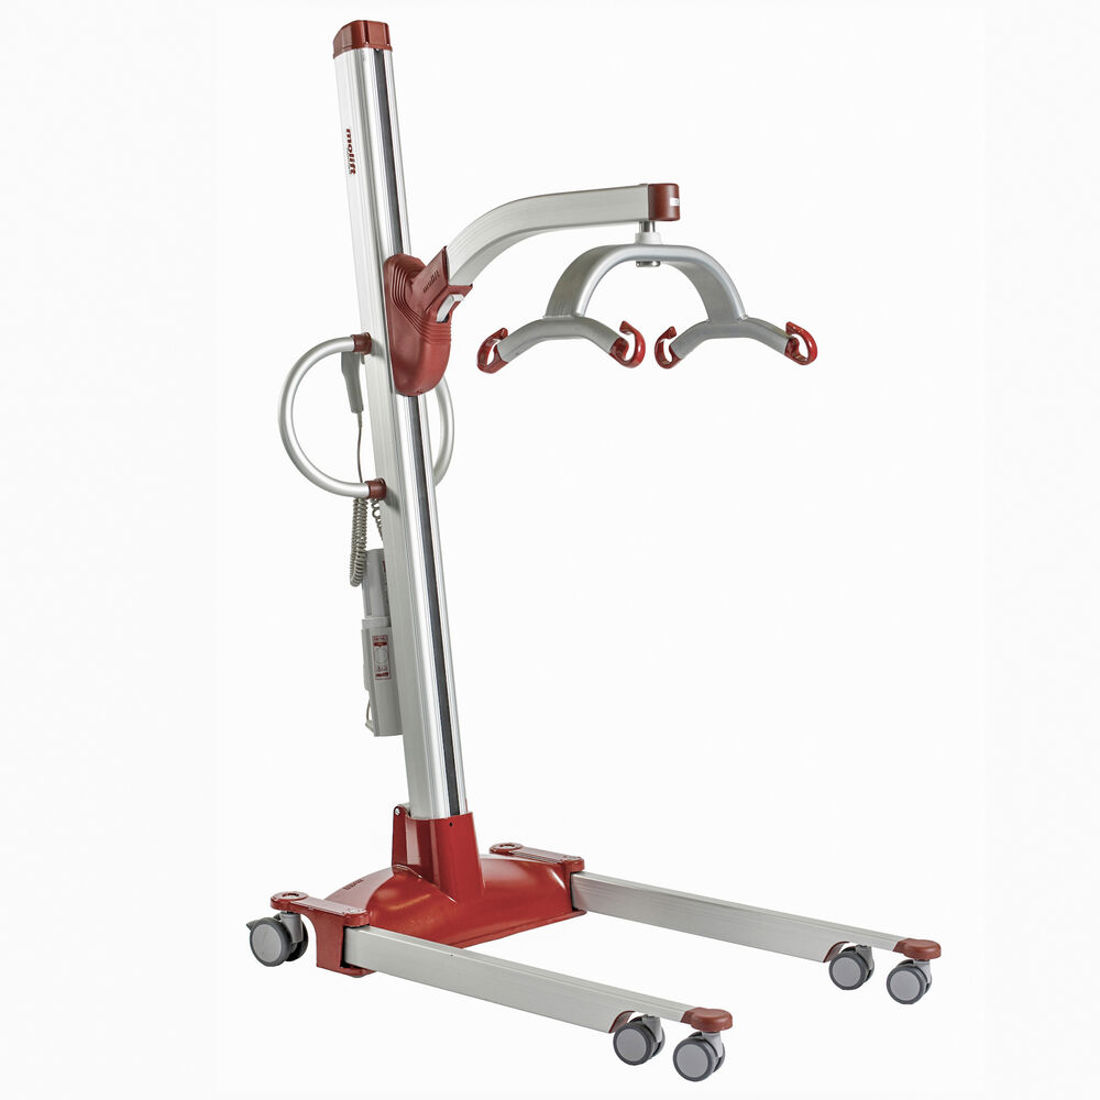 With an excellent hoisting range the Molift Partner 255 allows easy hoisting from the floor as well as high surfaces.